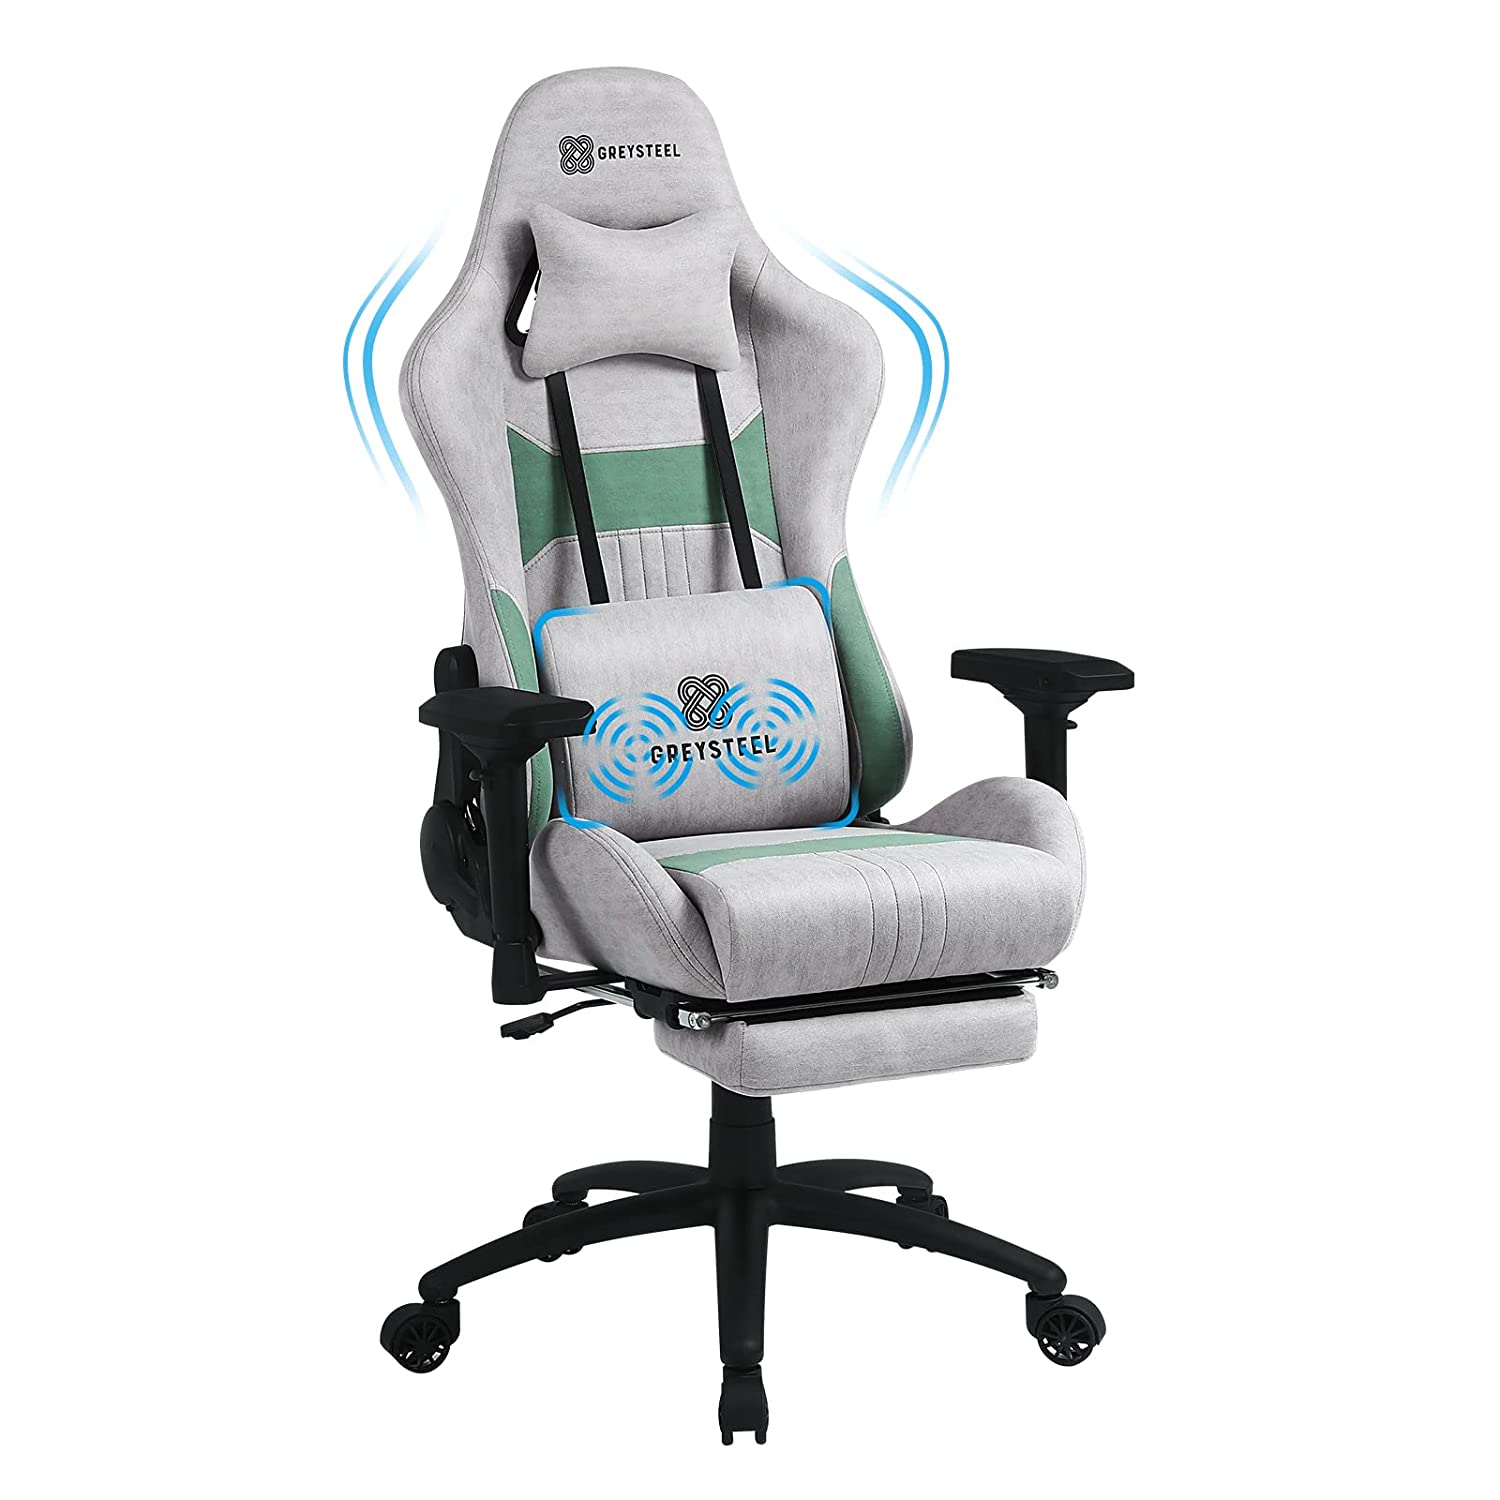 Greysteel-Breathe Massage Gaming Chair with Foot Rest & Computer